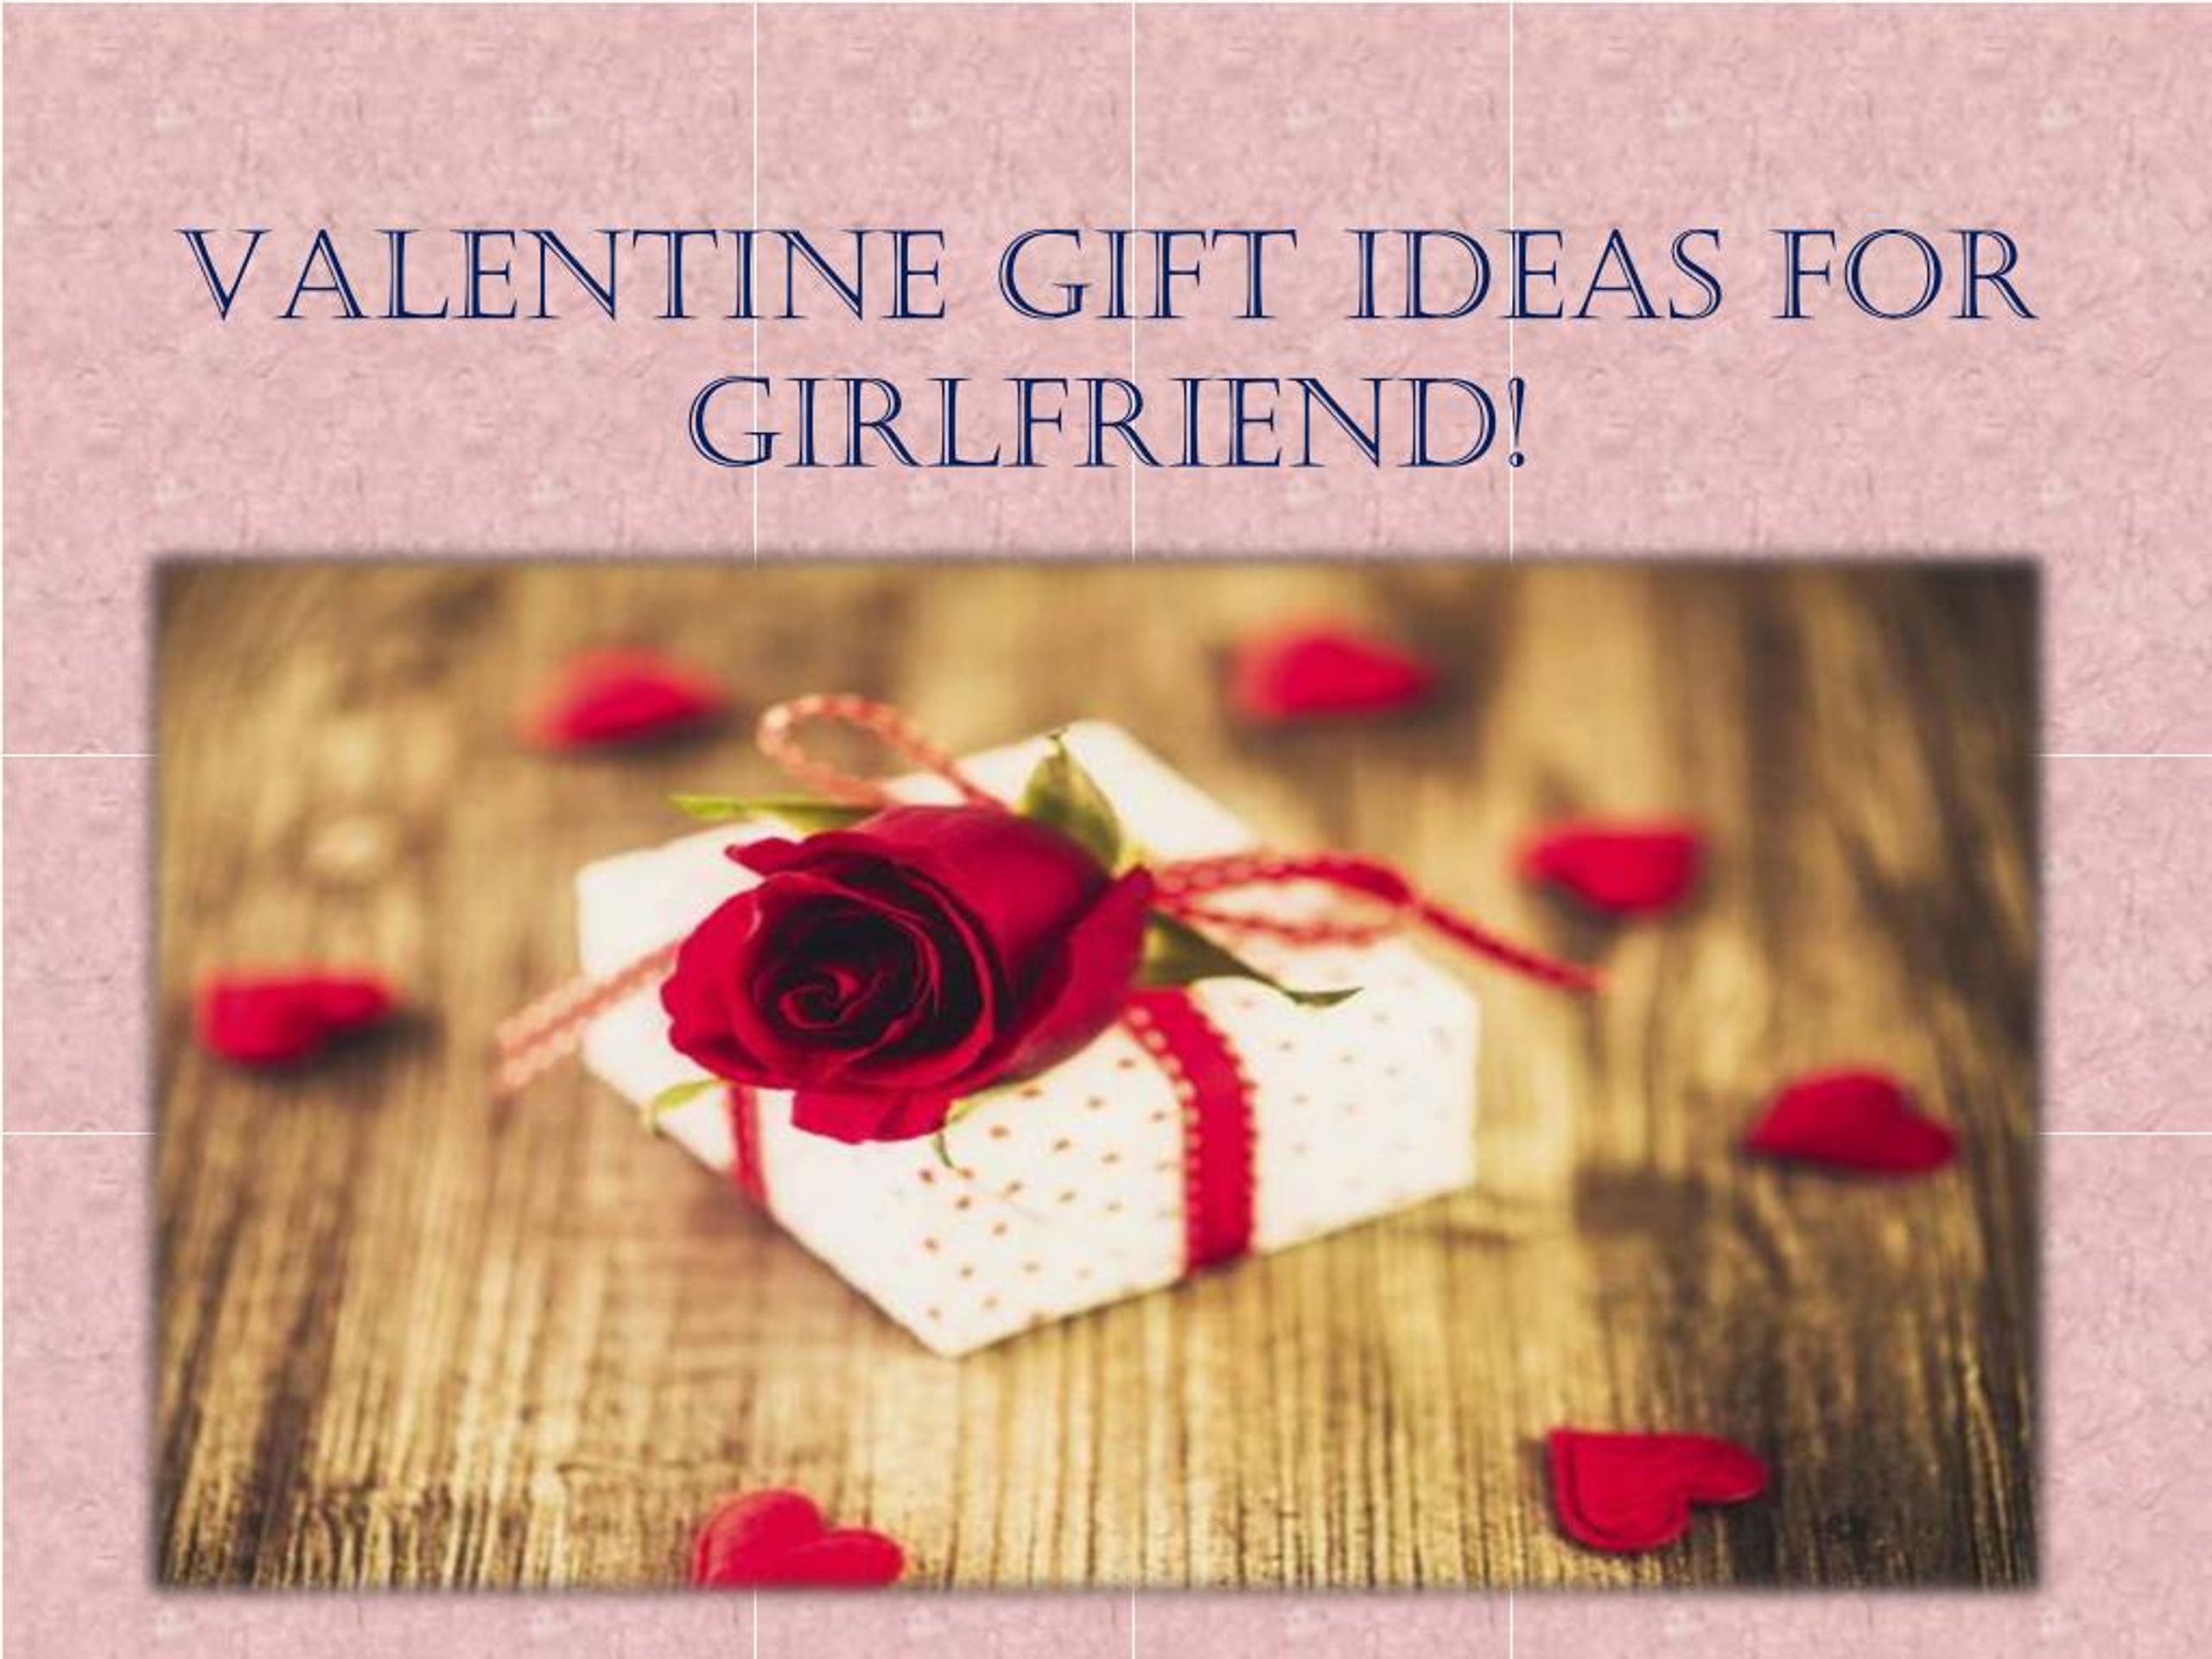 Gifts for Girlfriend  Unique Gift ideas for Girlfriend - Giftalove